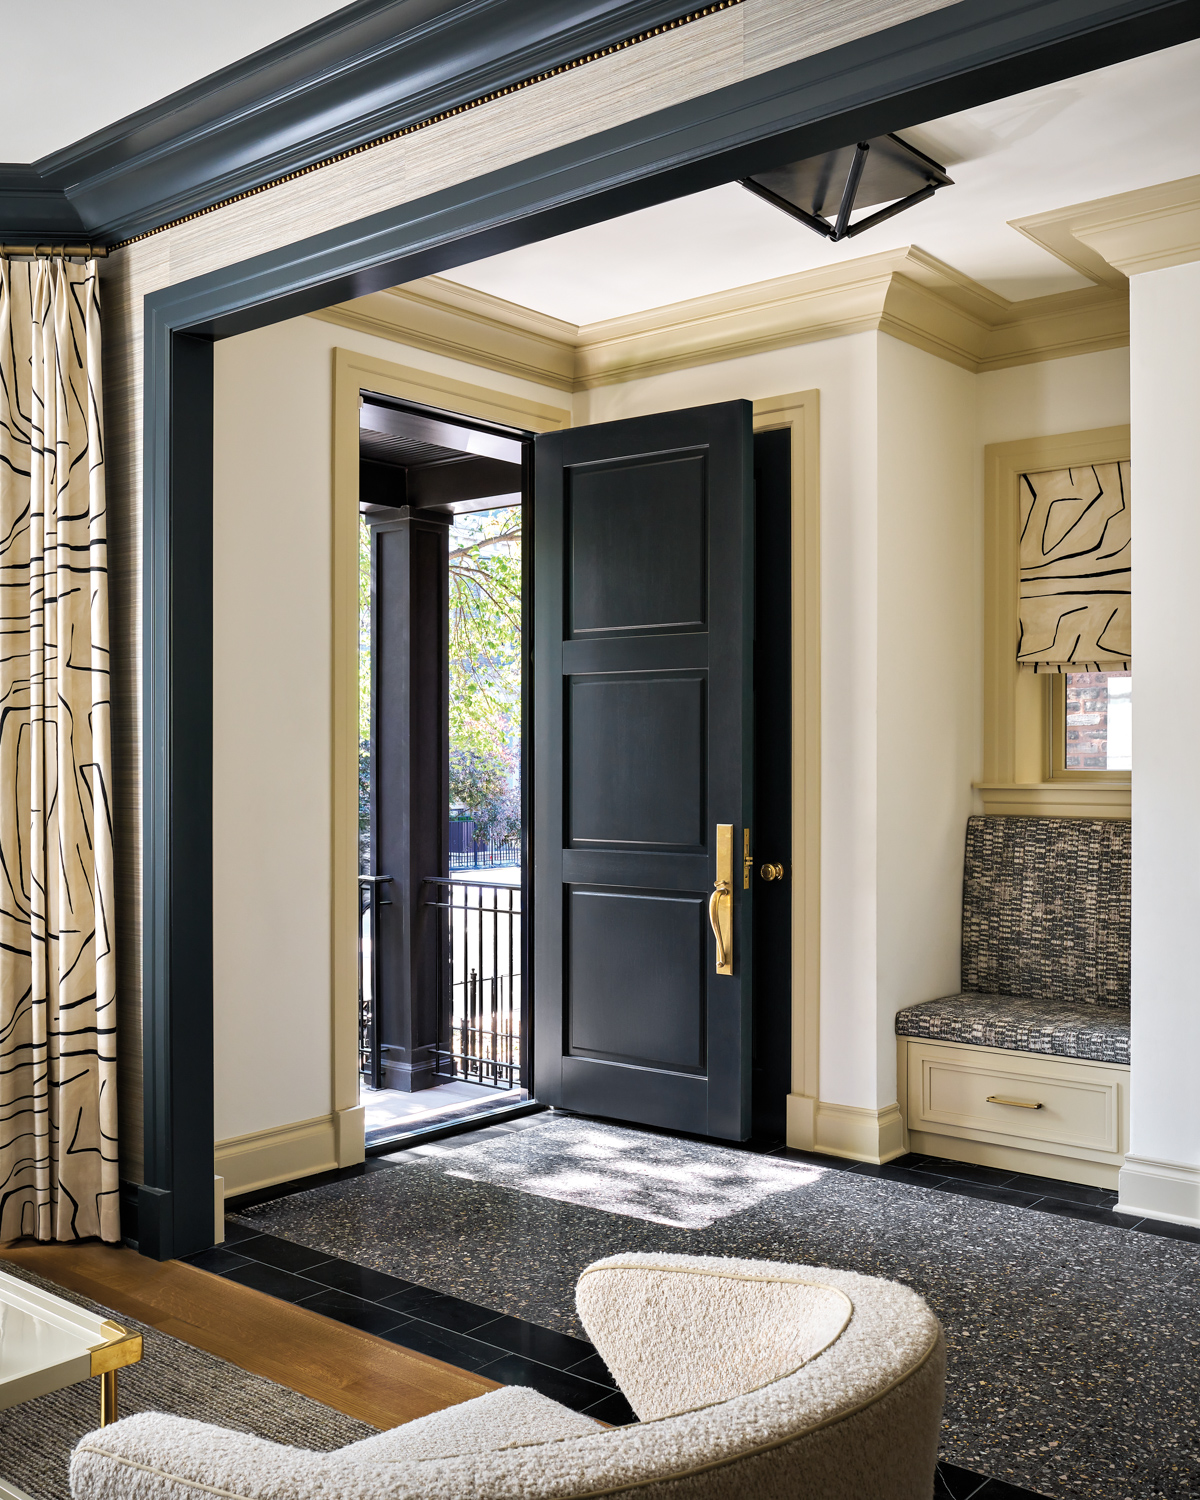 Black-white-and-tan entryway with a built-in...